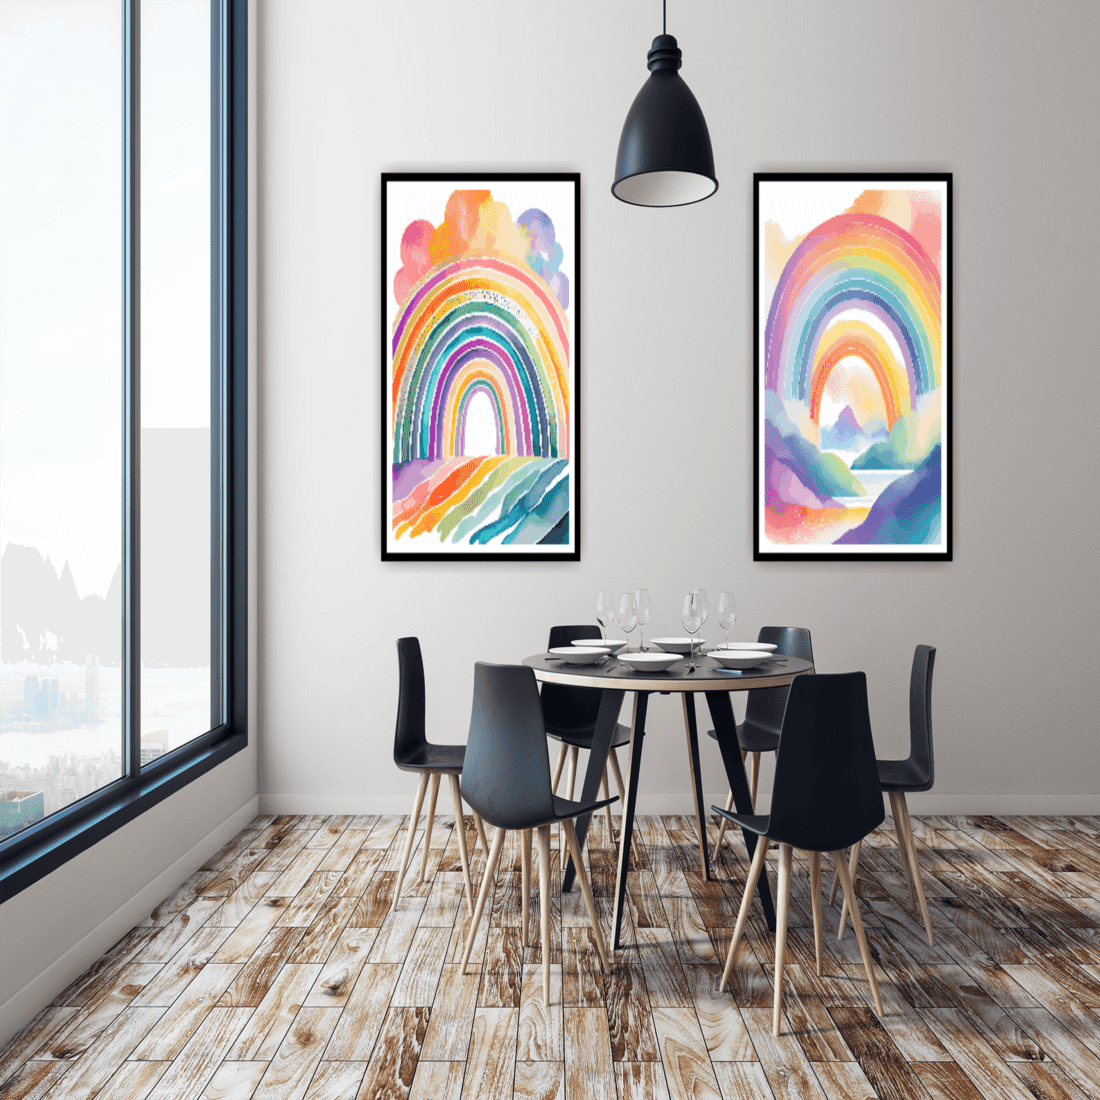 Chasing Rainbows: Colorful Gradients Wall Art Collection (8 image) preview image.